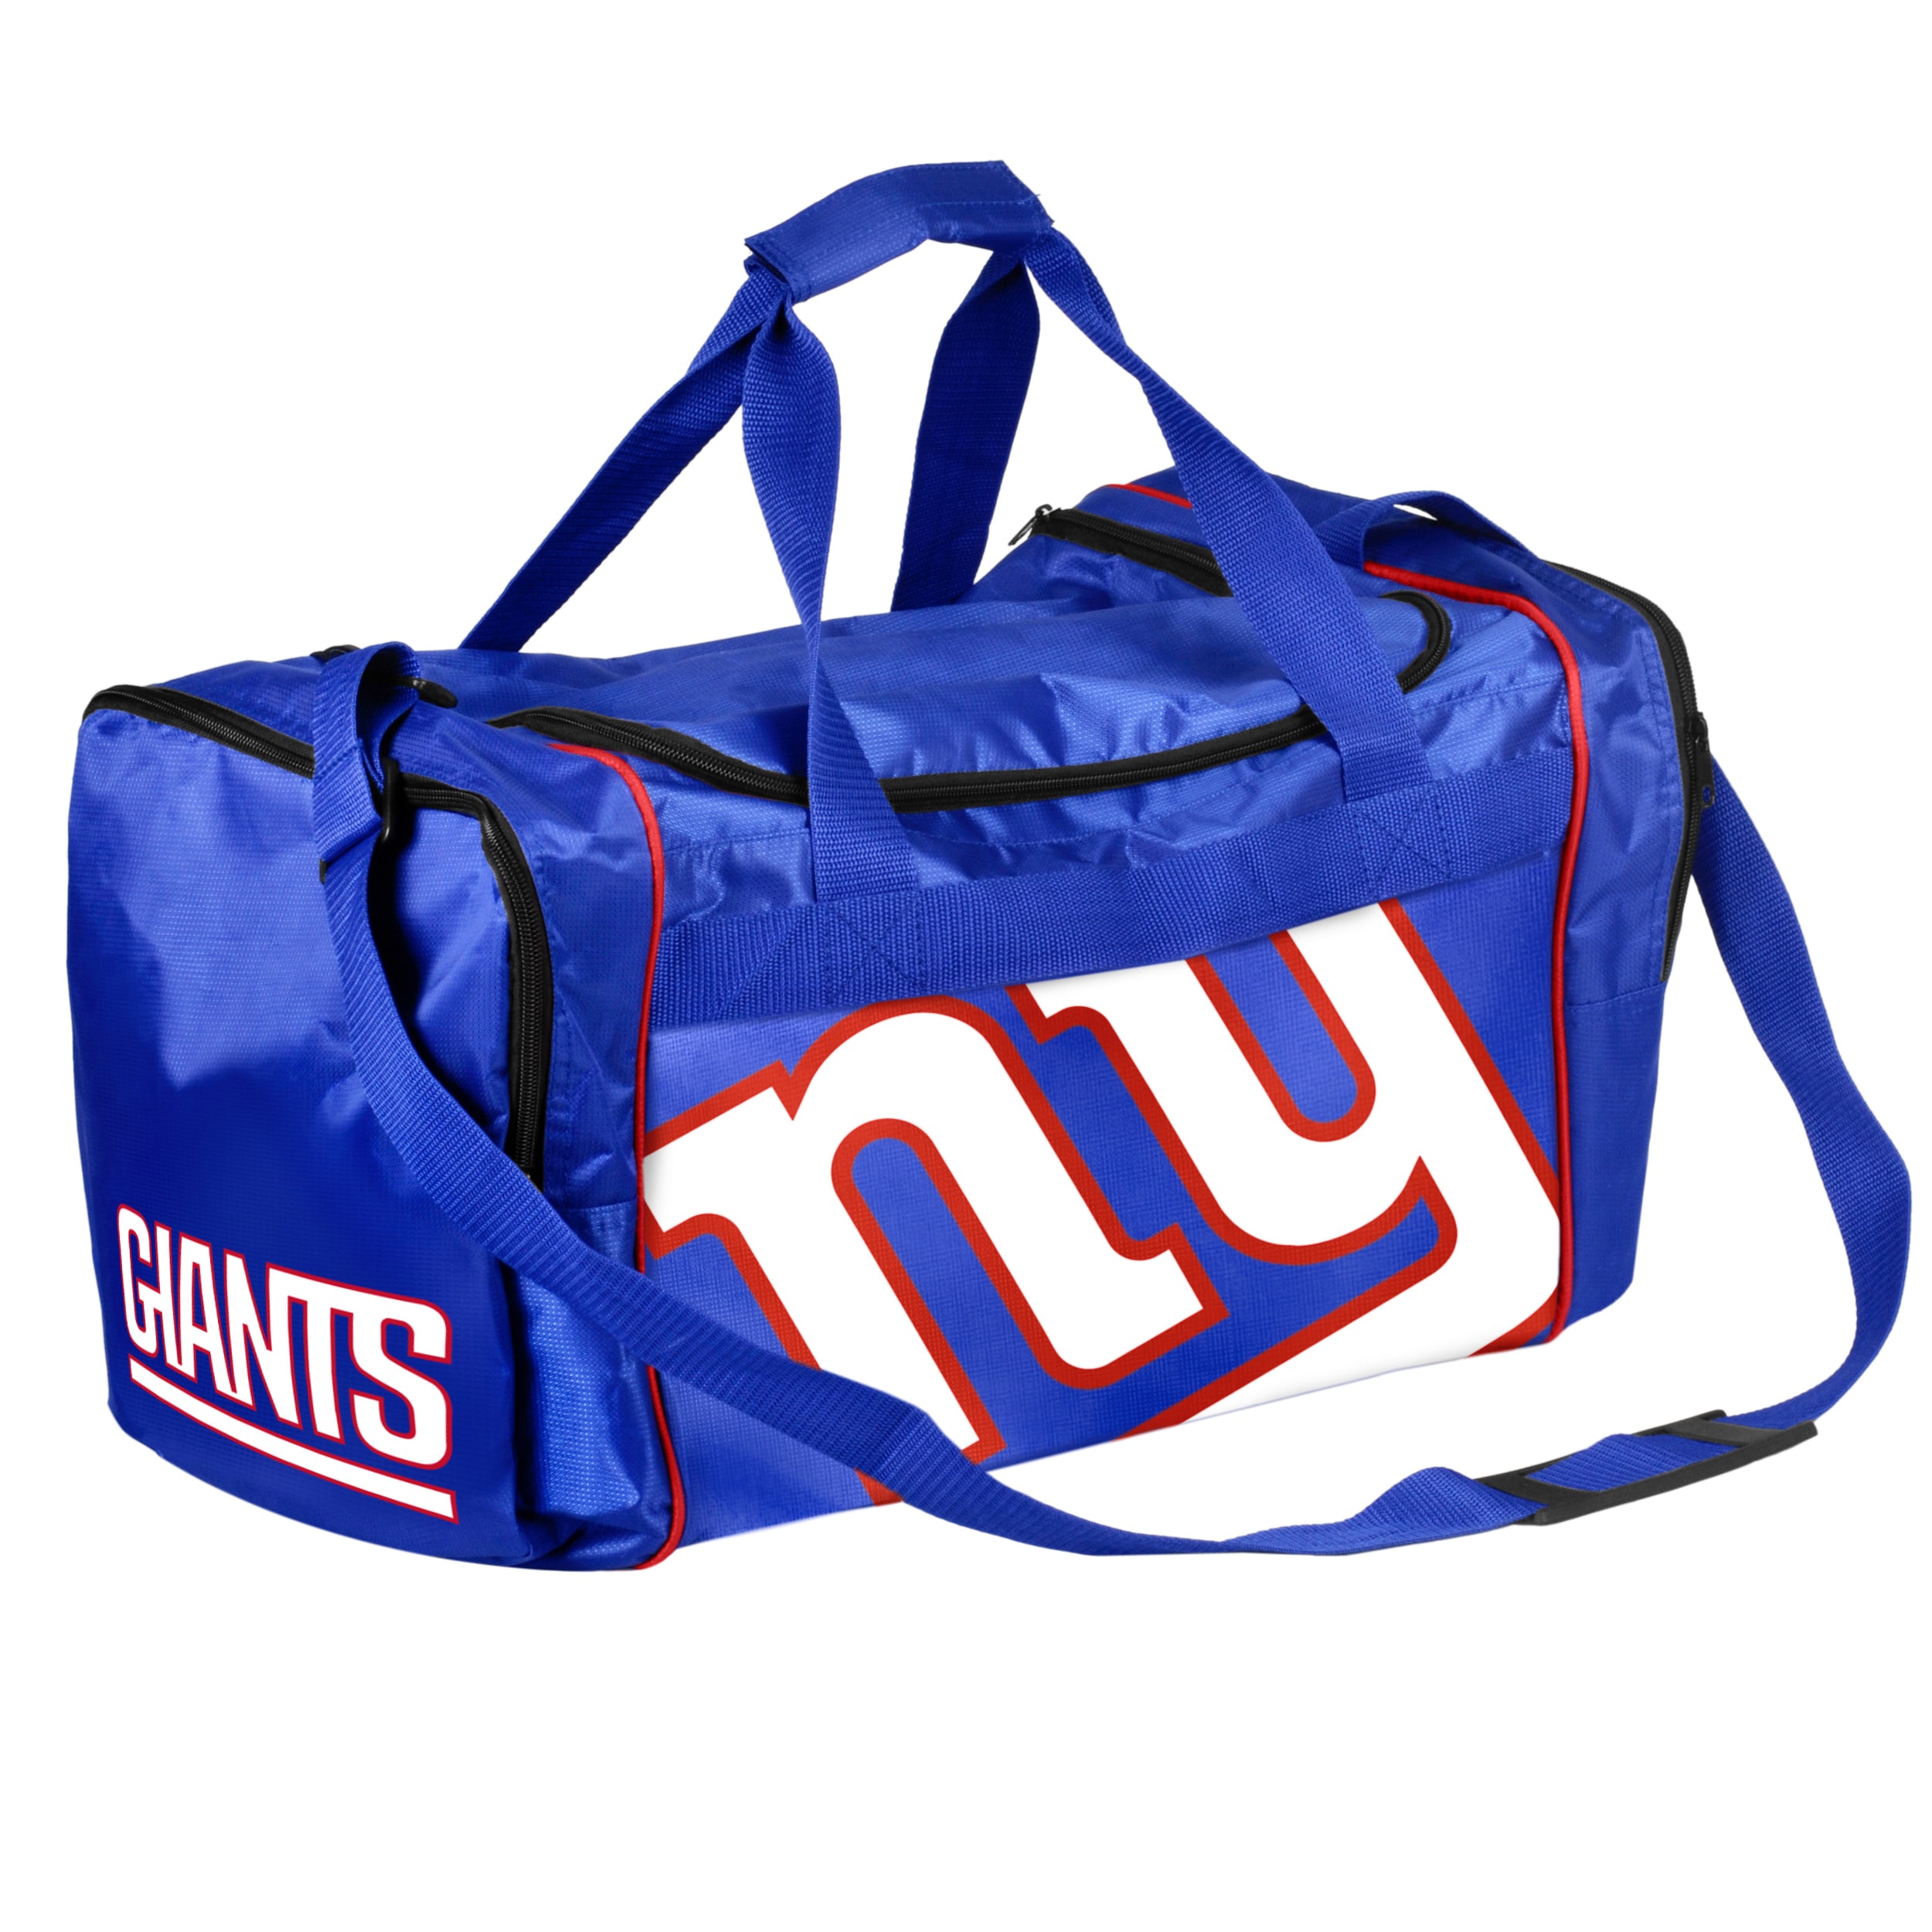 Forever Collectibles Nfl New York Giants 21 inch Core Duffle Bag